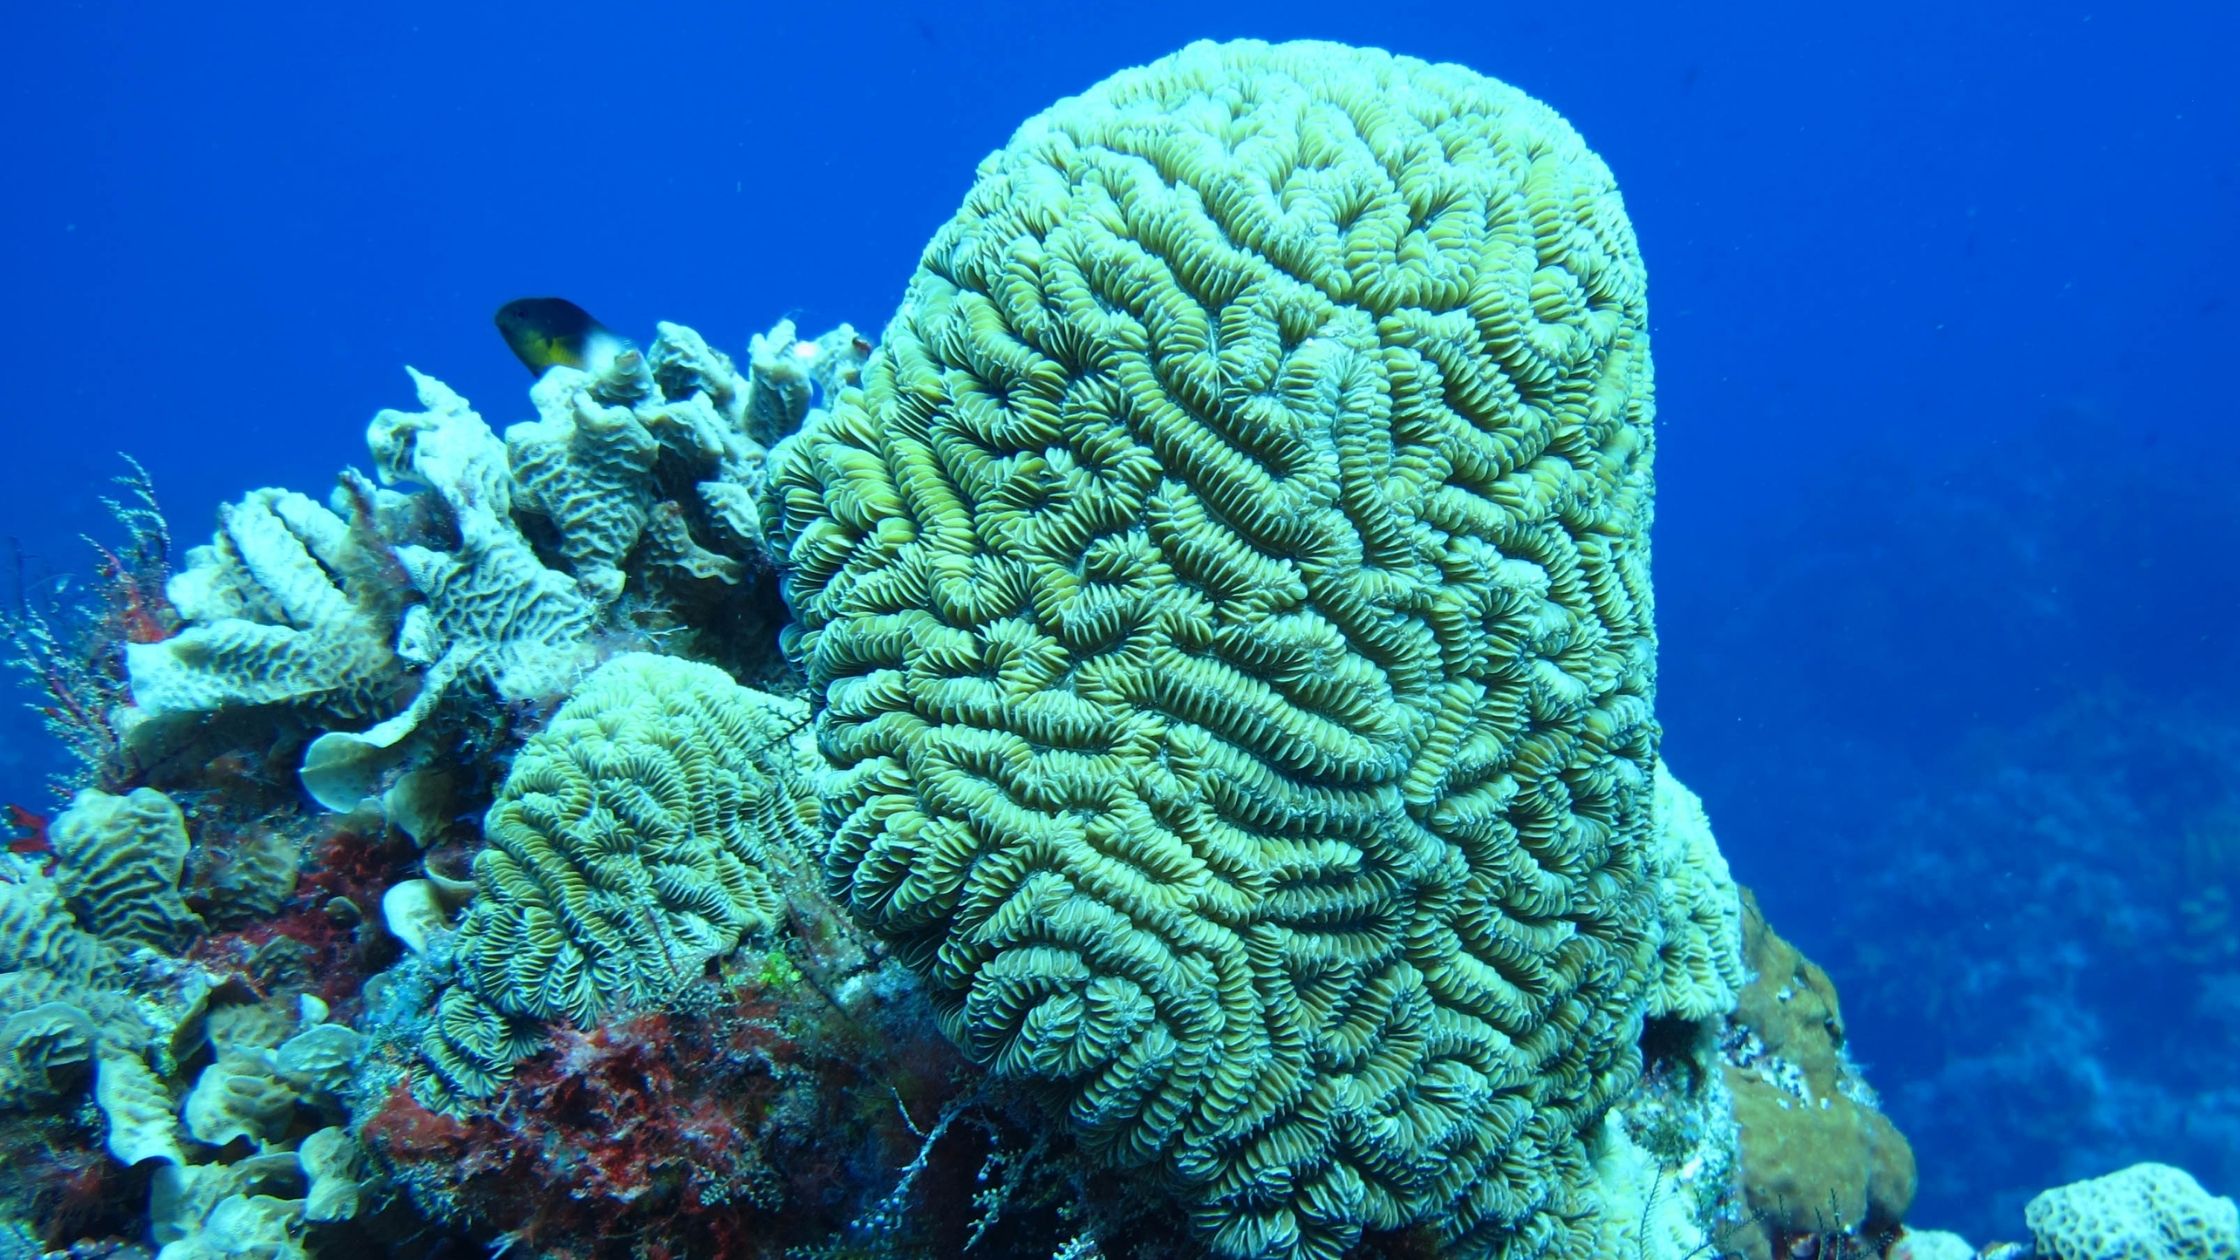 A picture of brain coral in the palancar reef.